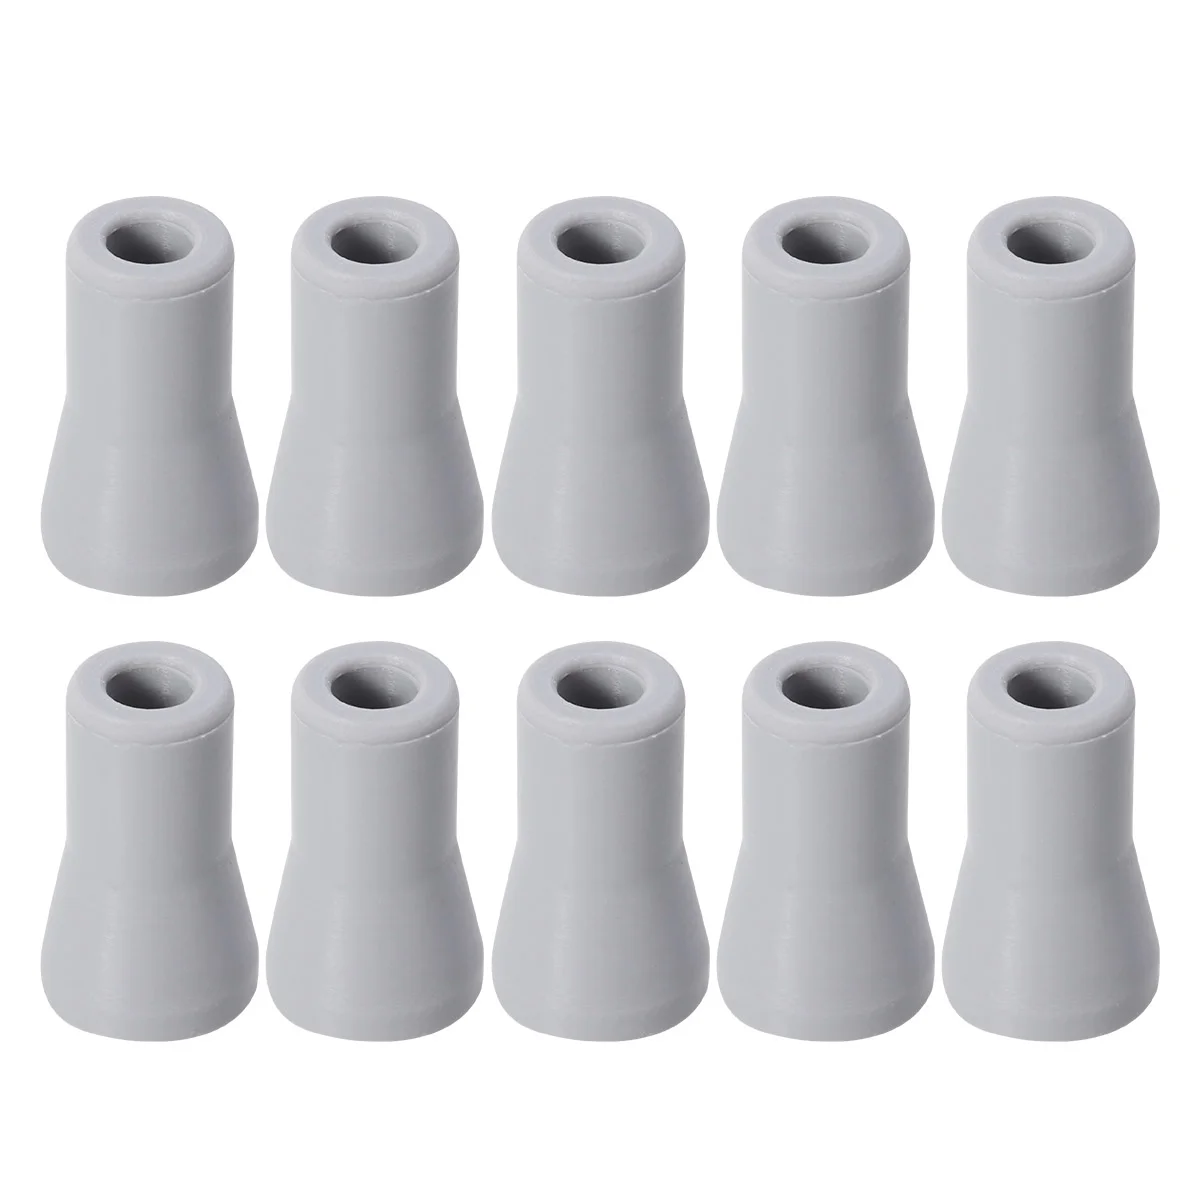 

10pcs/set Dental Suction Tube Adaptor Saliva Swivel Ejector Convertor Autoclavable for Dentist Surgical Suction Tips (Grey)